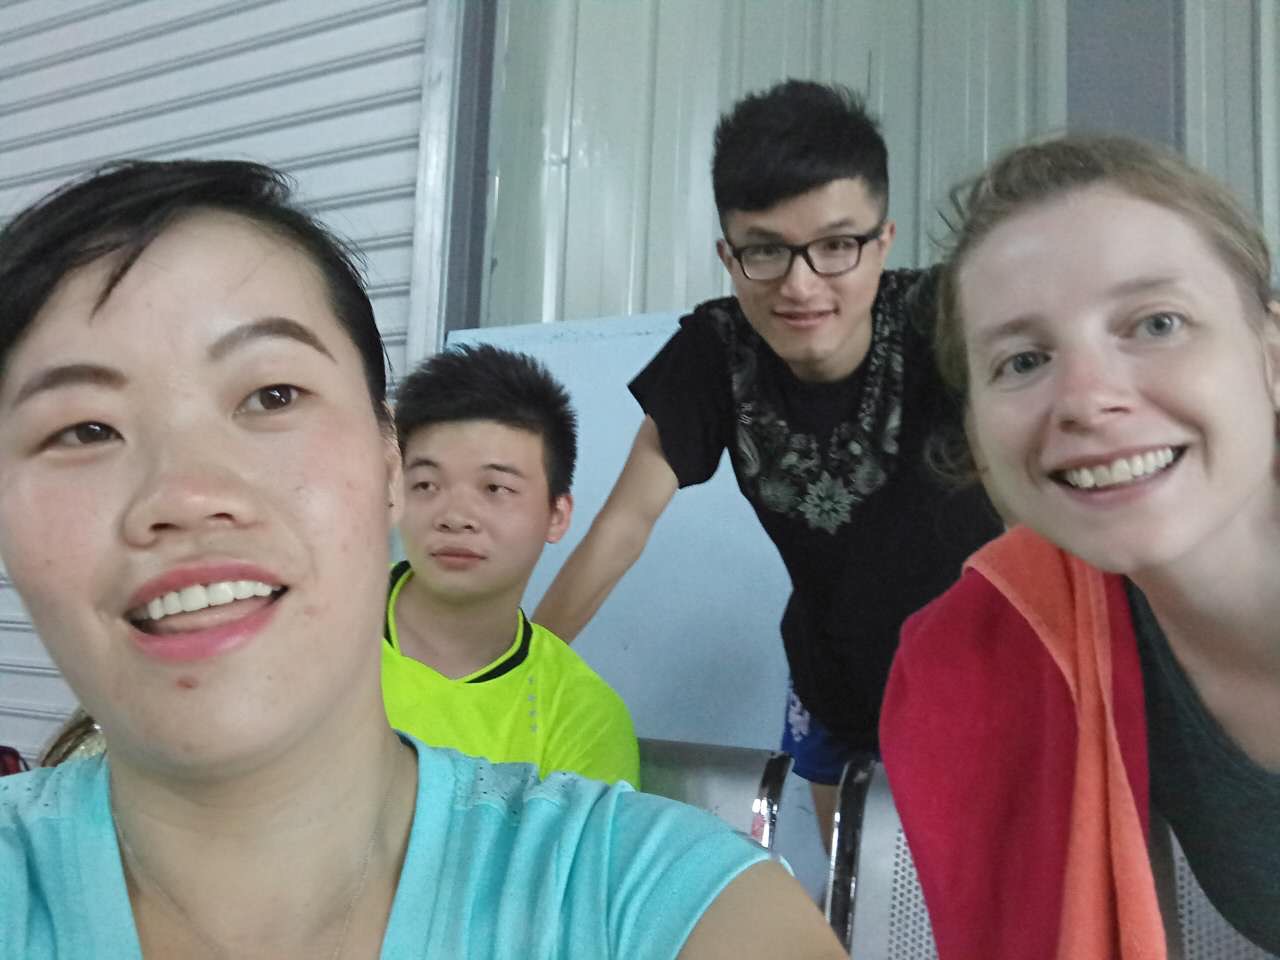 As my coaches beloved group, we are often asked to sit and wait if the courts are too packed. (He knows he has our loyalty already, so we aren't the priority.) I find waiting soooo boring but one time my friend insisted we take a series of selfies, haha. 